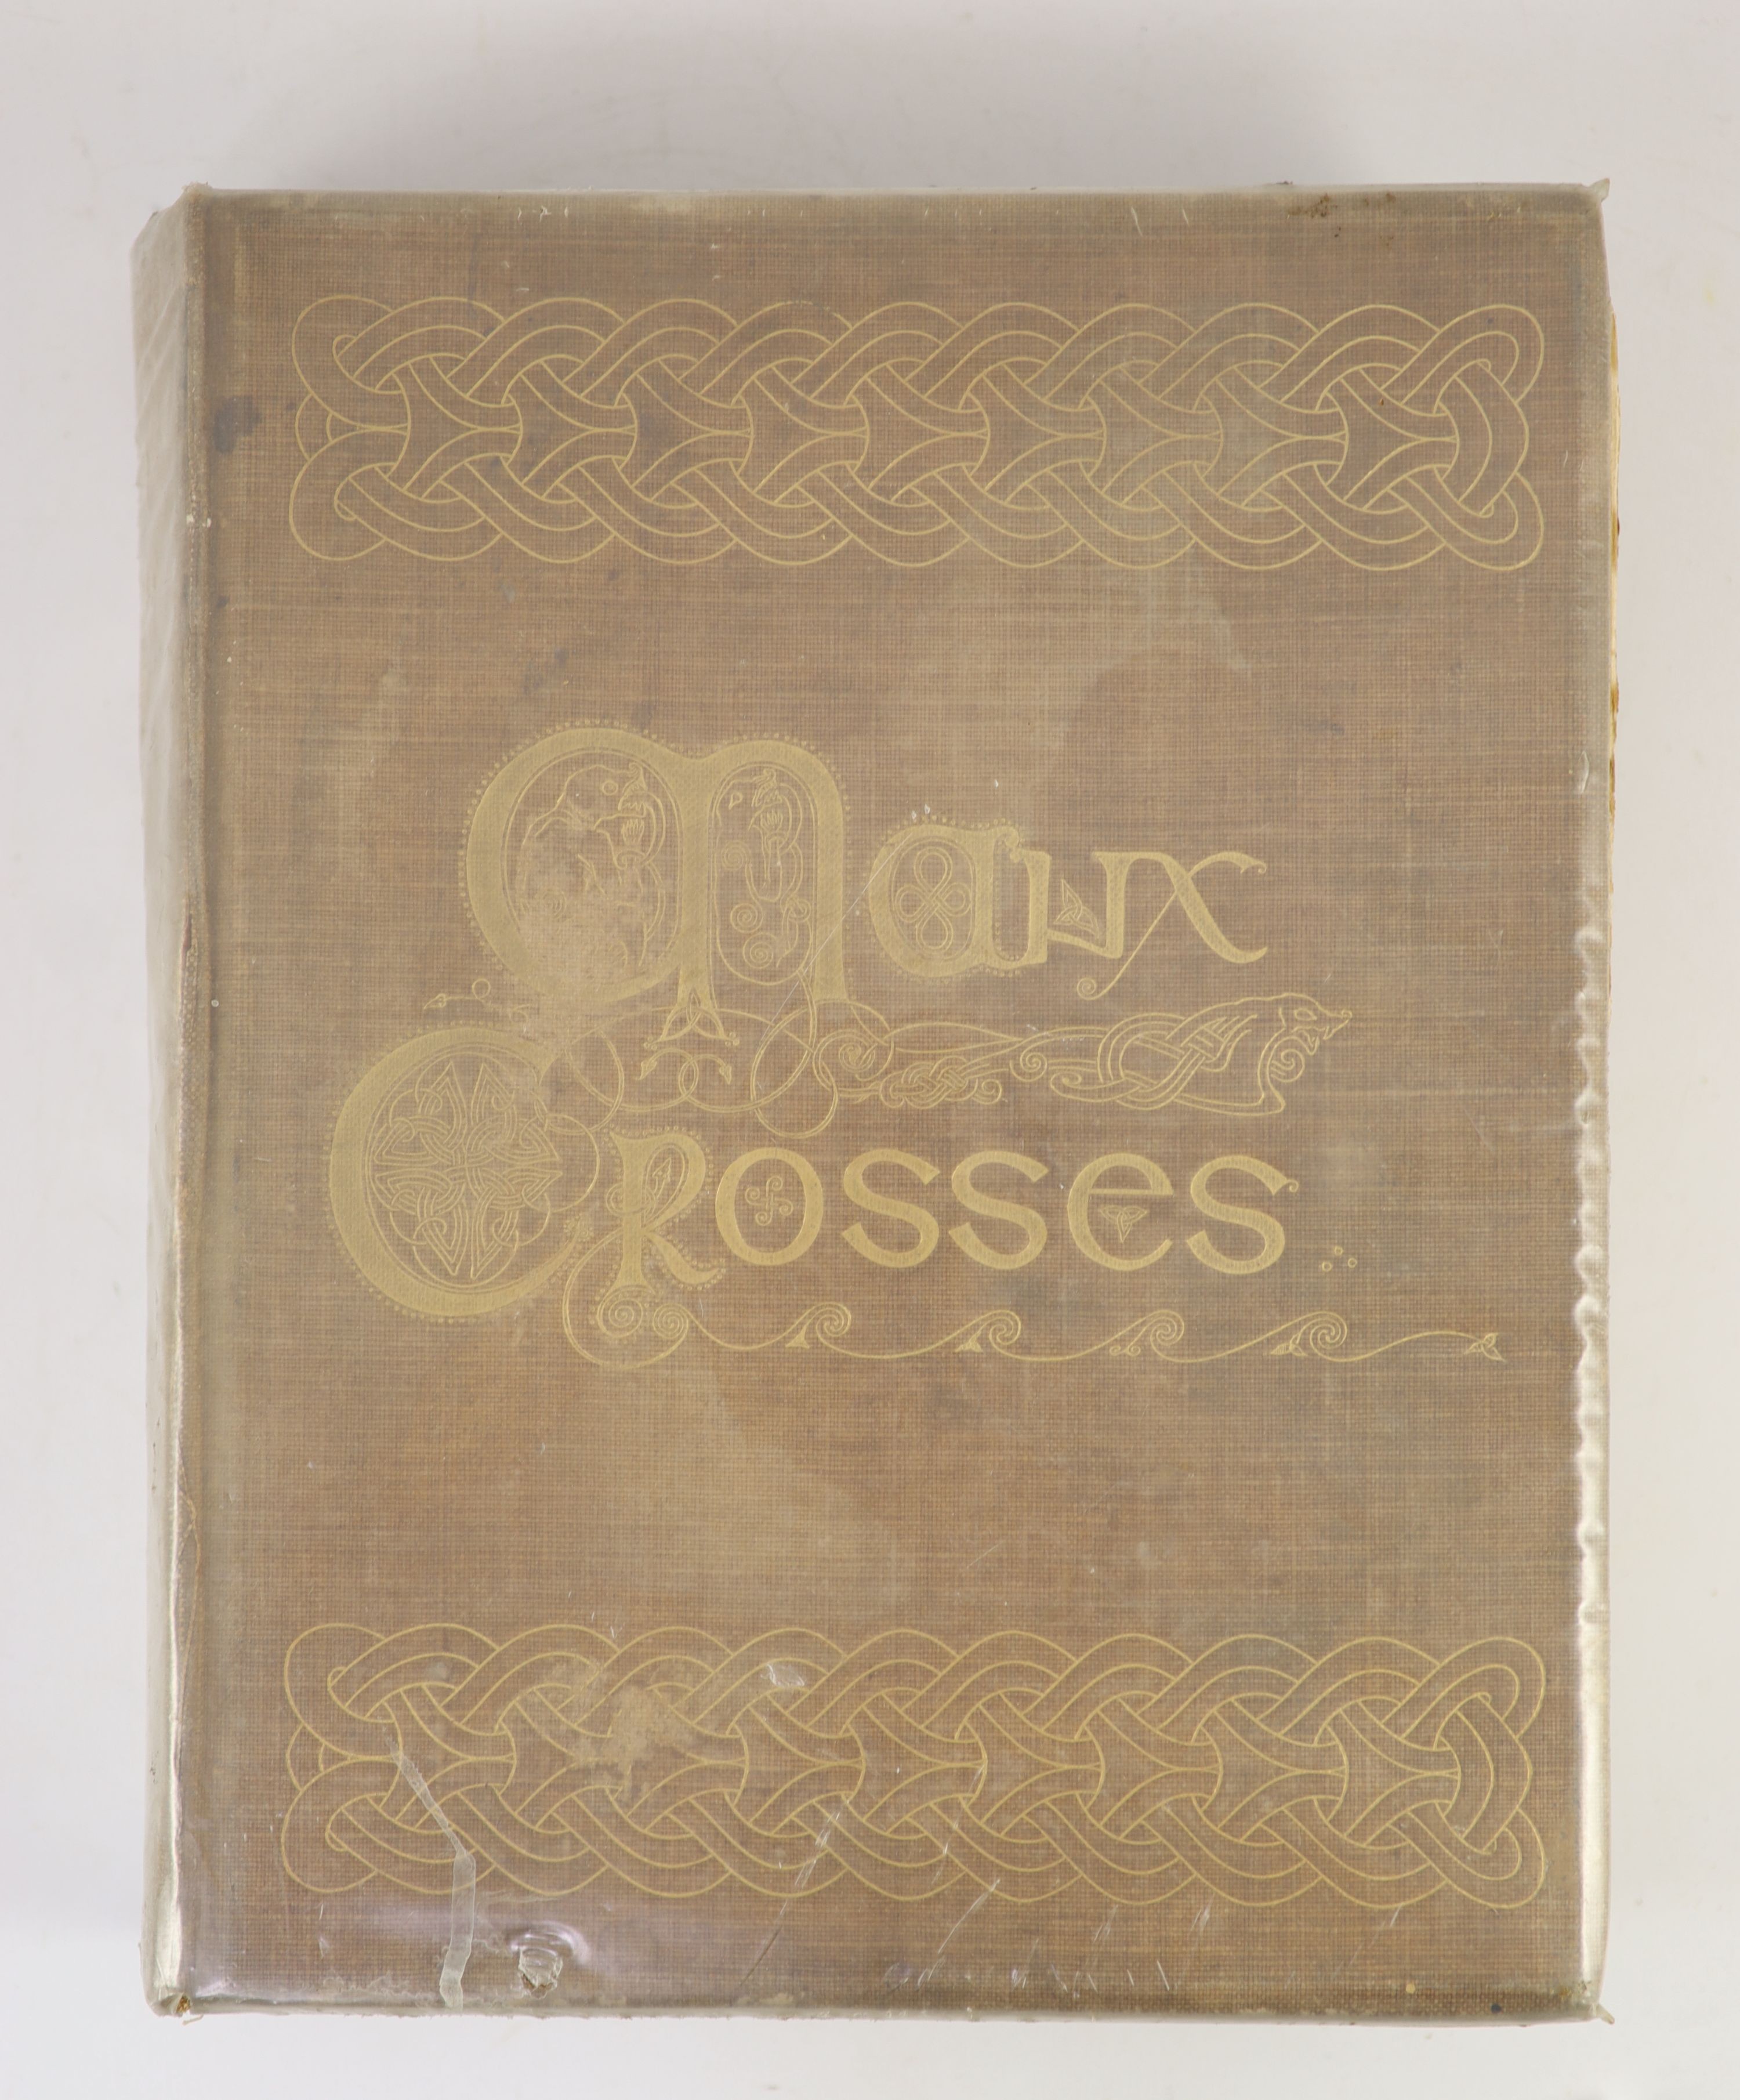 Kermode, P.M.C - Manx Crosses or the Inscribed and Sculptured Monuments of the Isle of Man, 4to, original cloth, with frontis, 2 coloured maps and 66 plates, London, 1907